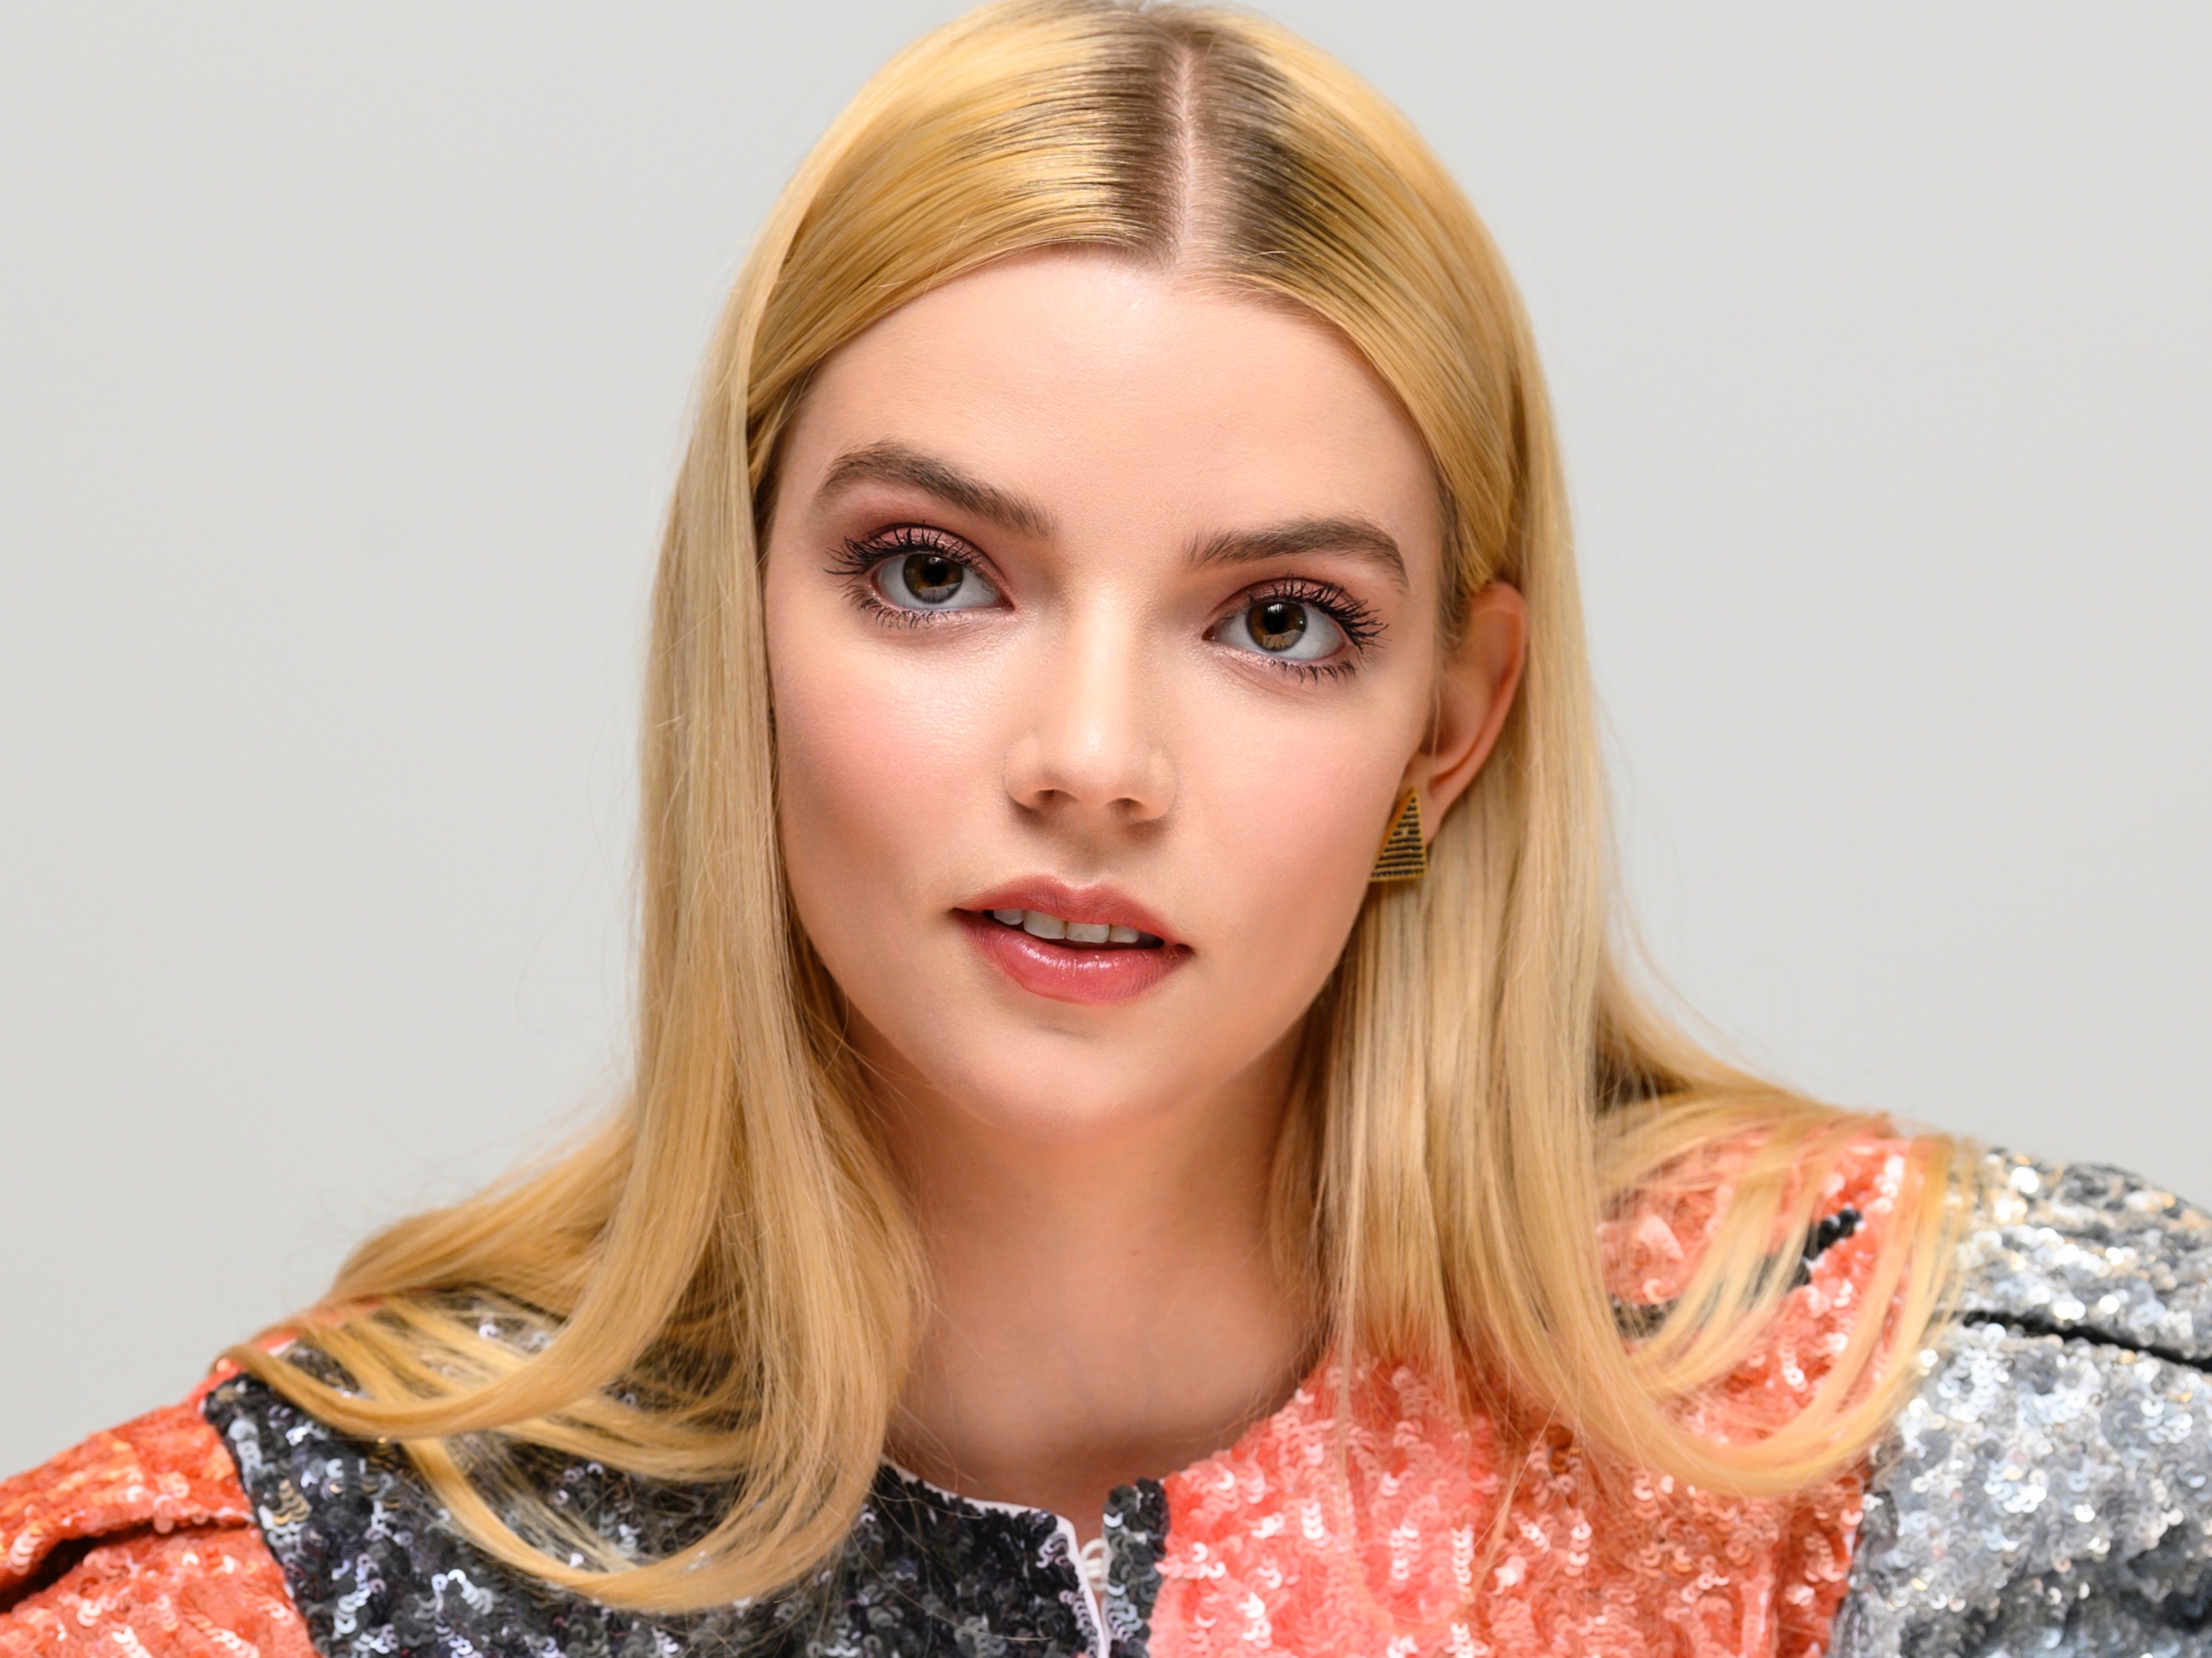 Anya Taylor-Joy would be second youngest limited actress Globe